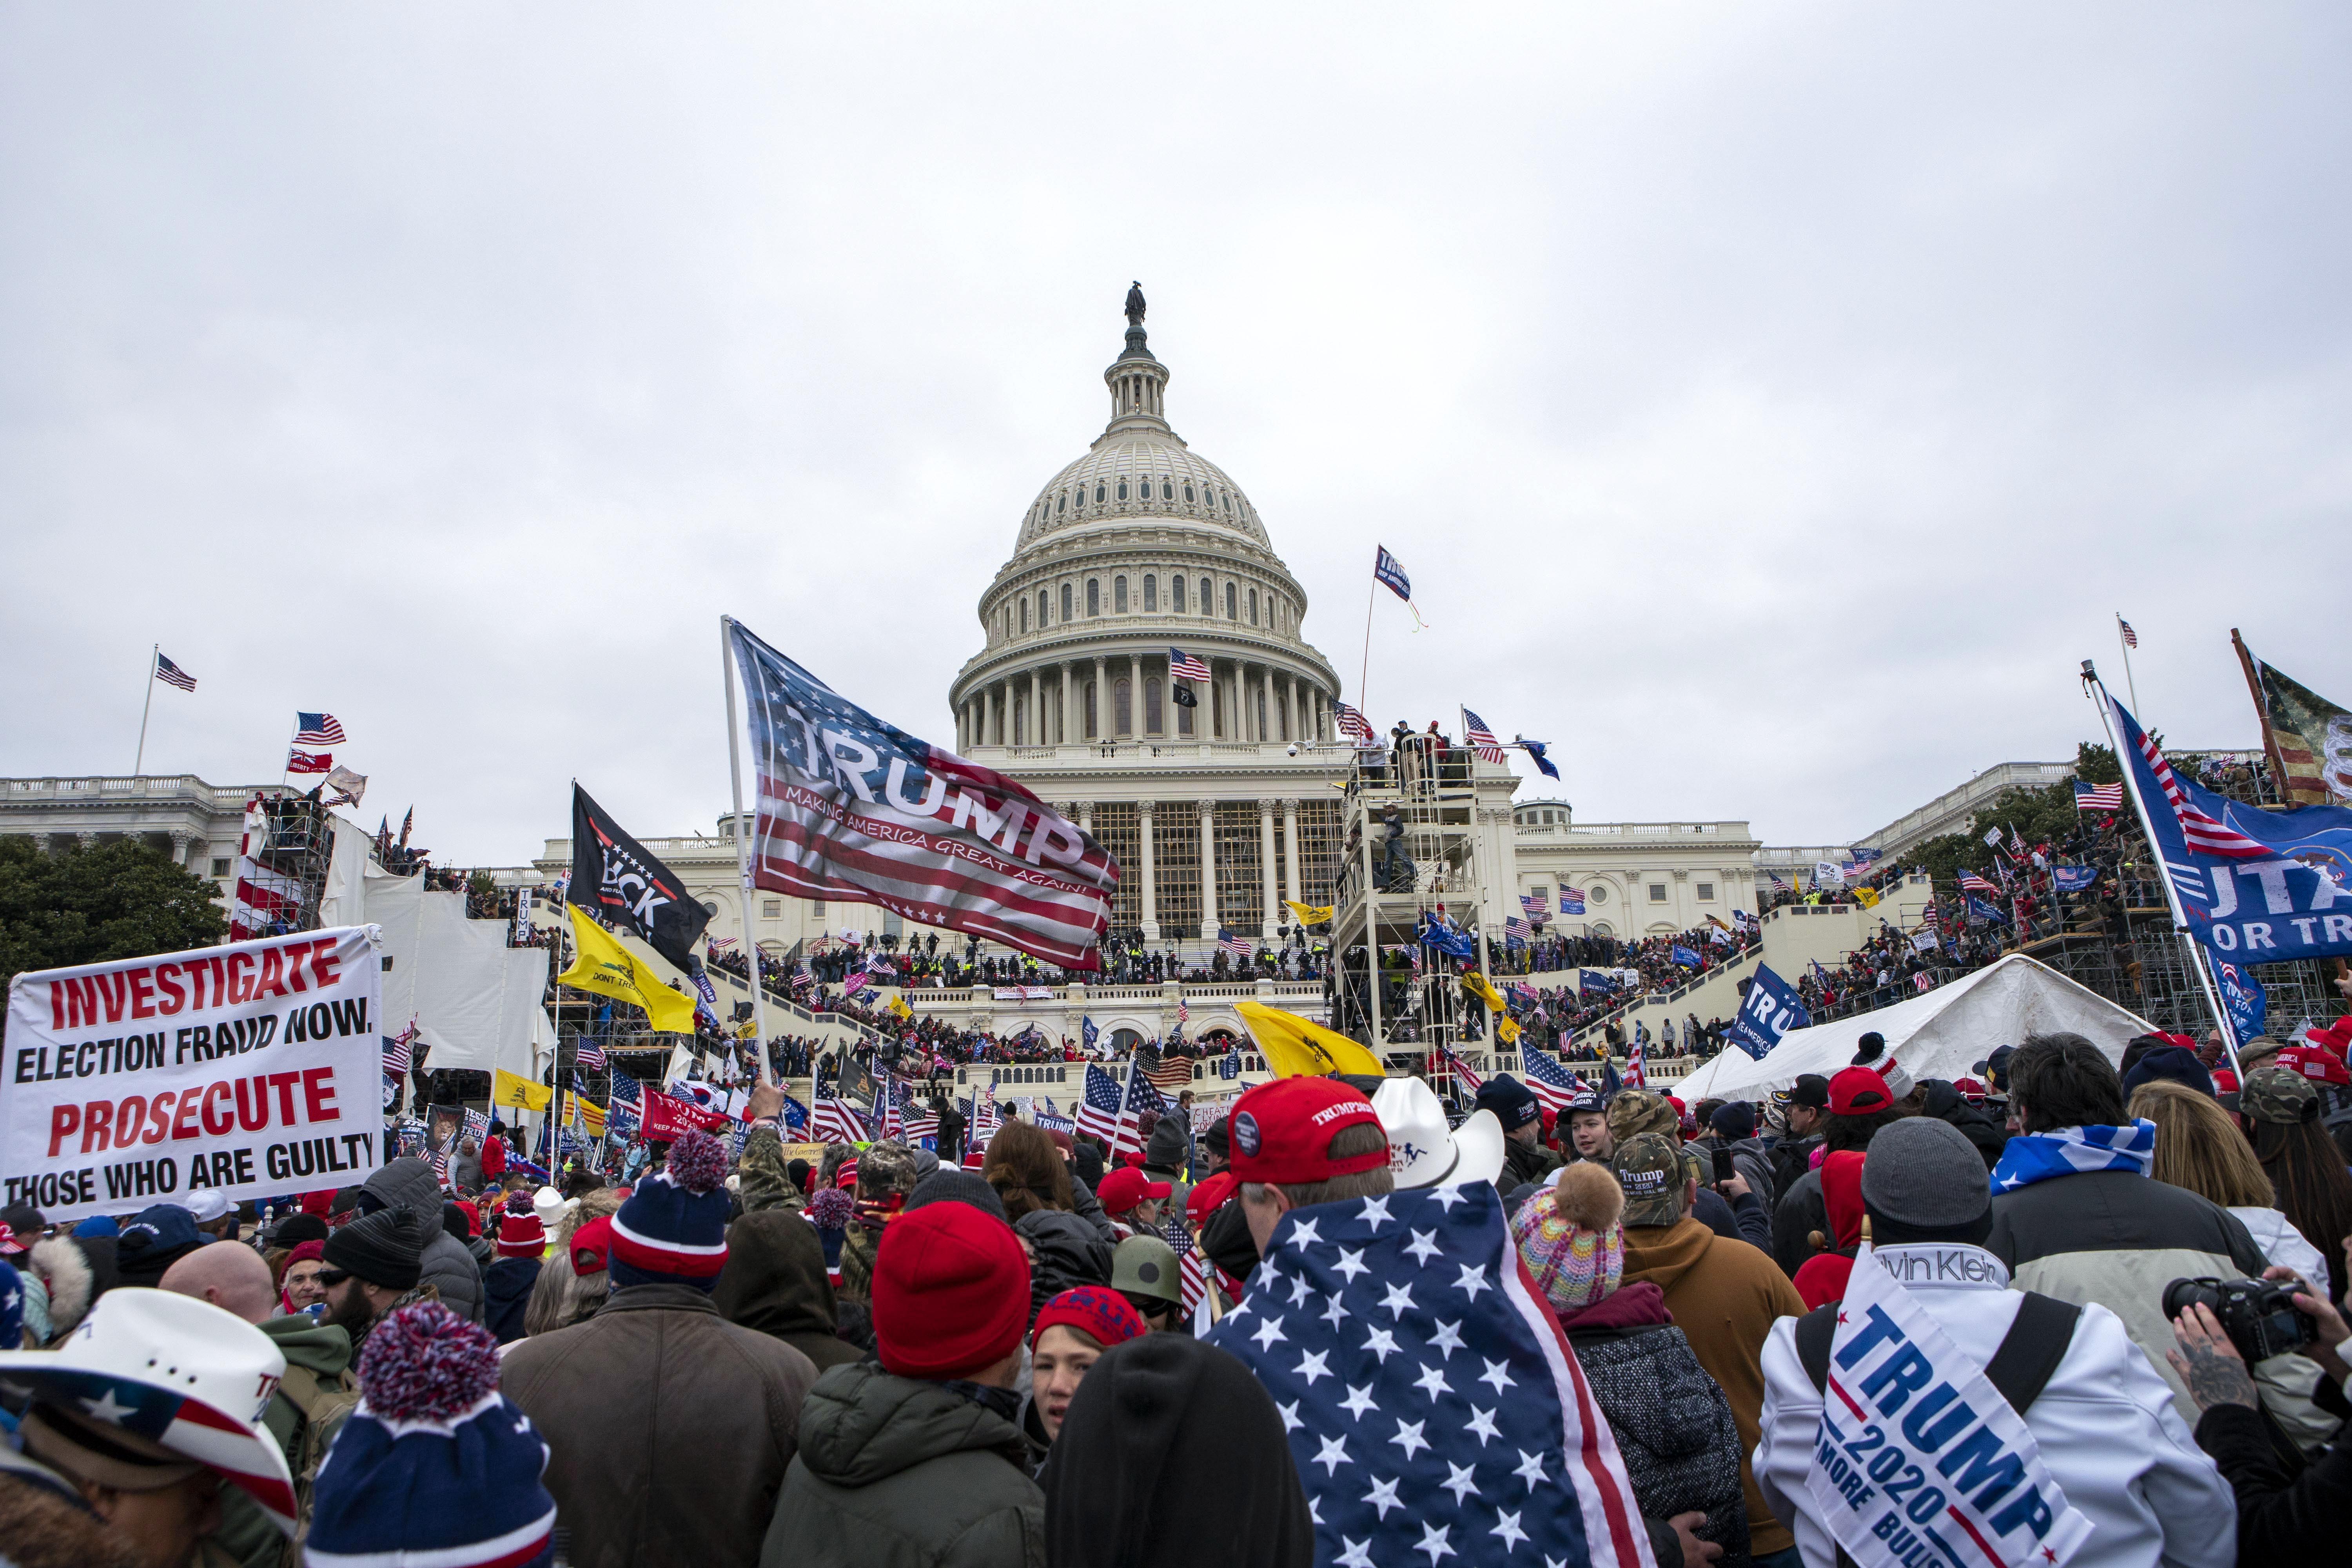 FILE - Rioters loyal to President Donald Trump rally at the U.S. Capitol in Washington, Jan. 6, 2021. Retired NASCAR driver Tighe Scott, his adult son and two other Pennsylvania men are facing felony charges stemming from confrontations with police during the Jan. 6, 2021, siege on the U.S. Capitol. (AP Photo/Jose Luis Magana, File)